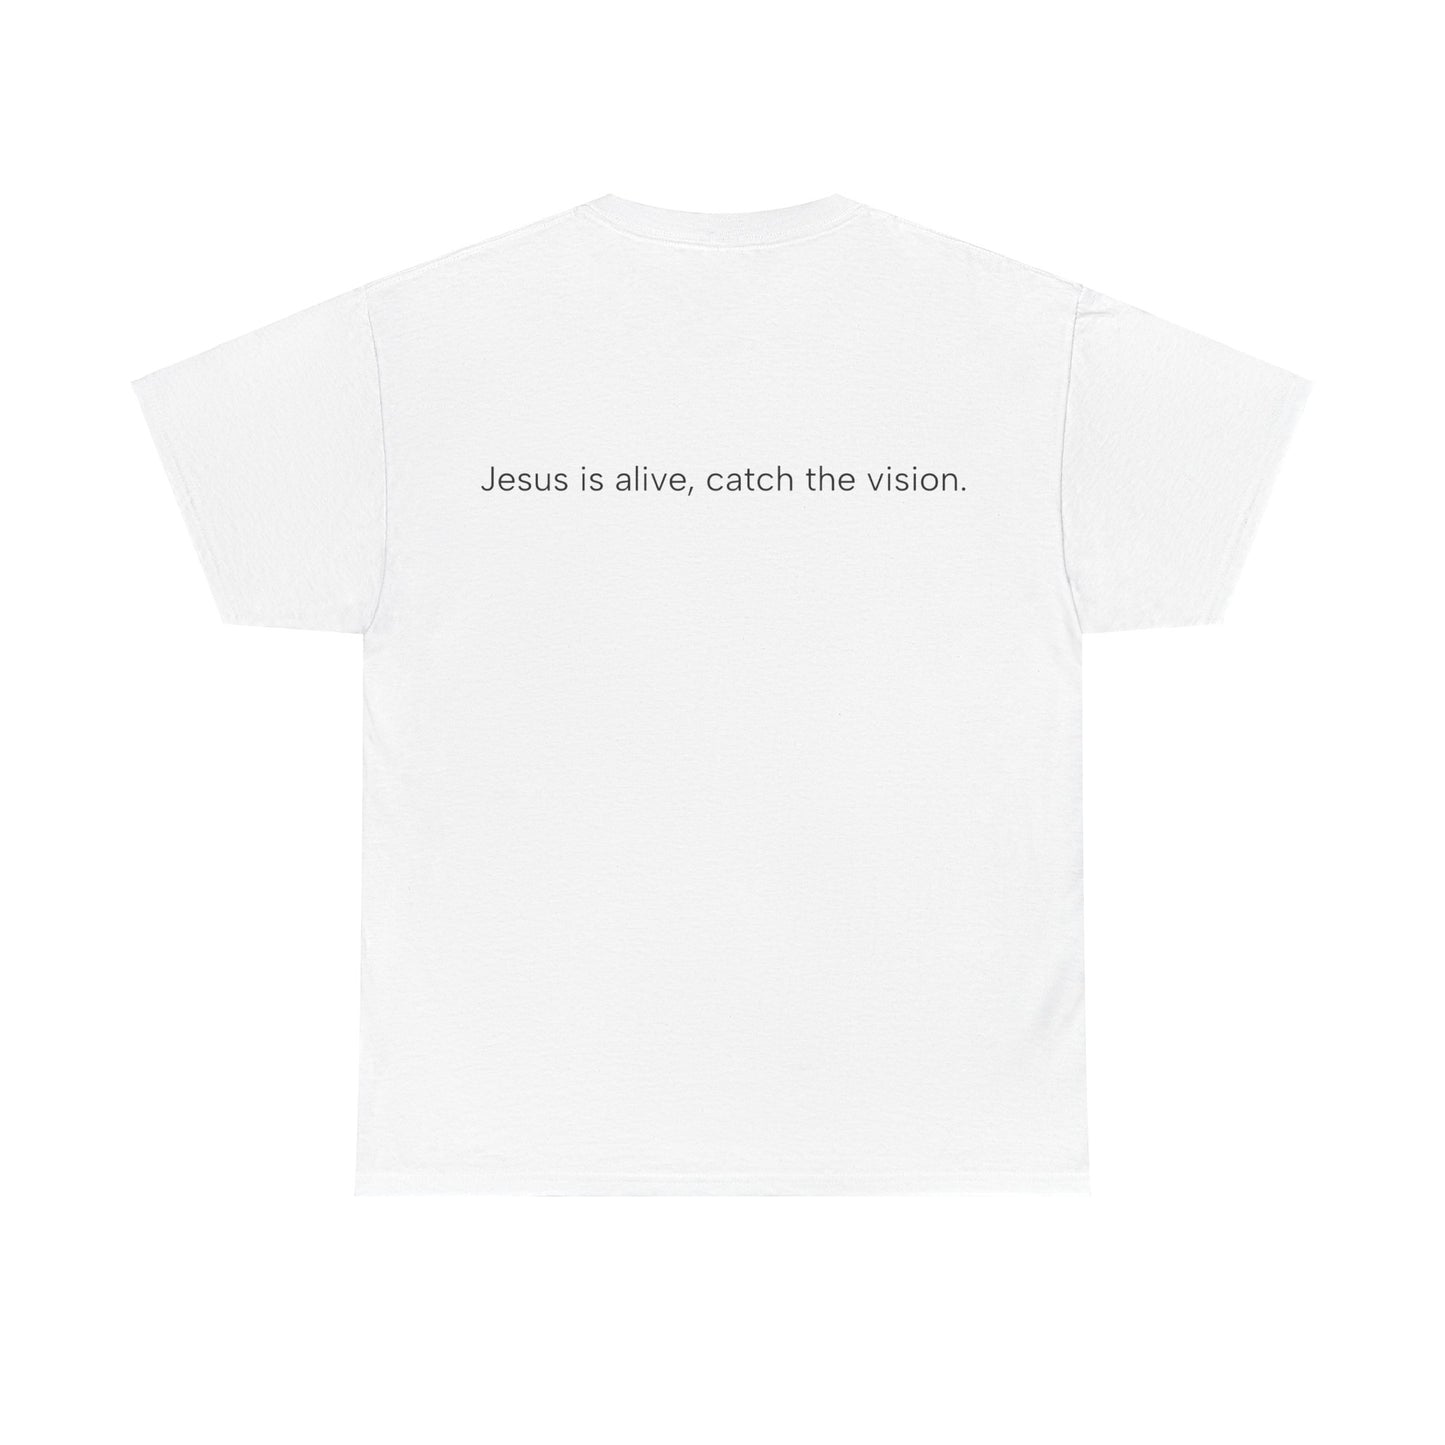 Jesus is alive, catch the vision. T-shirt UNISEX